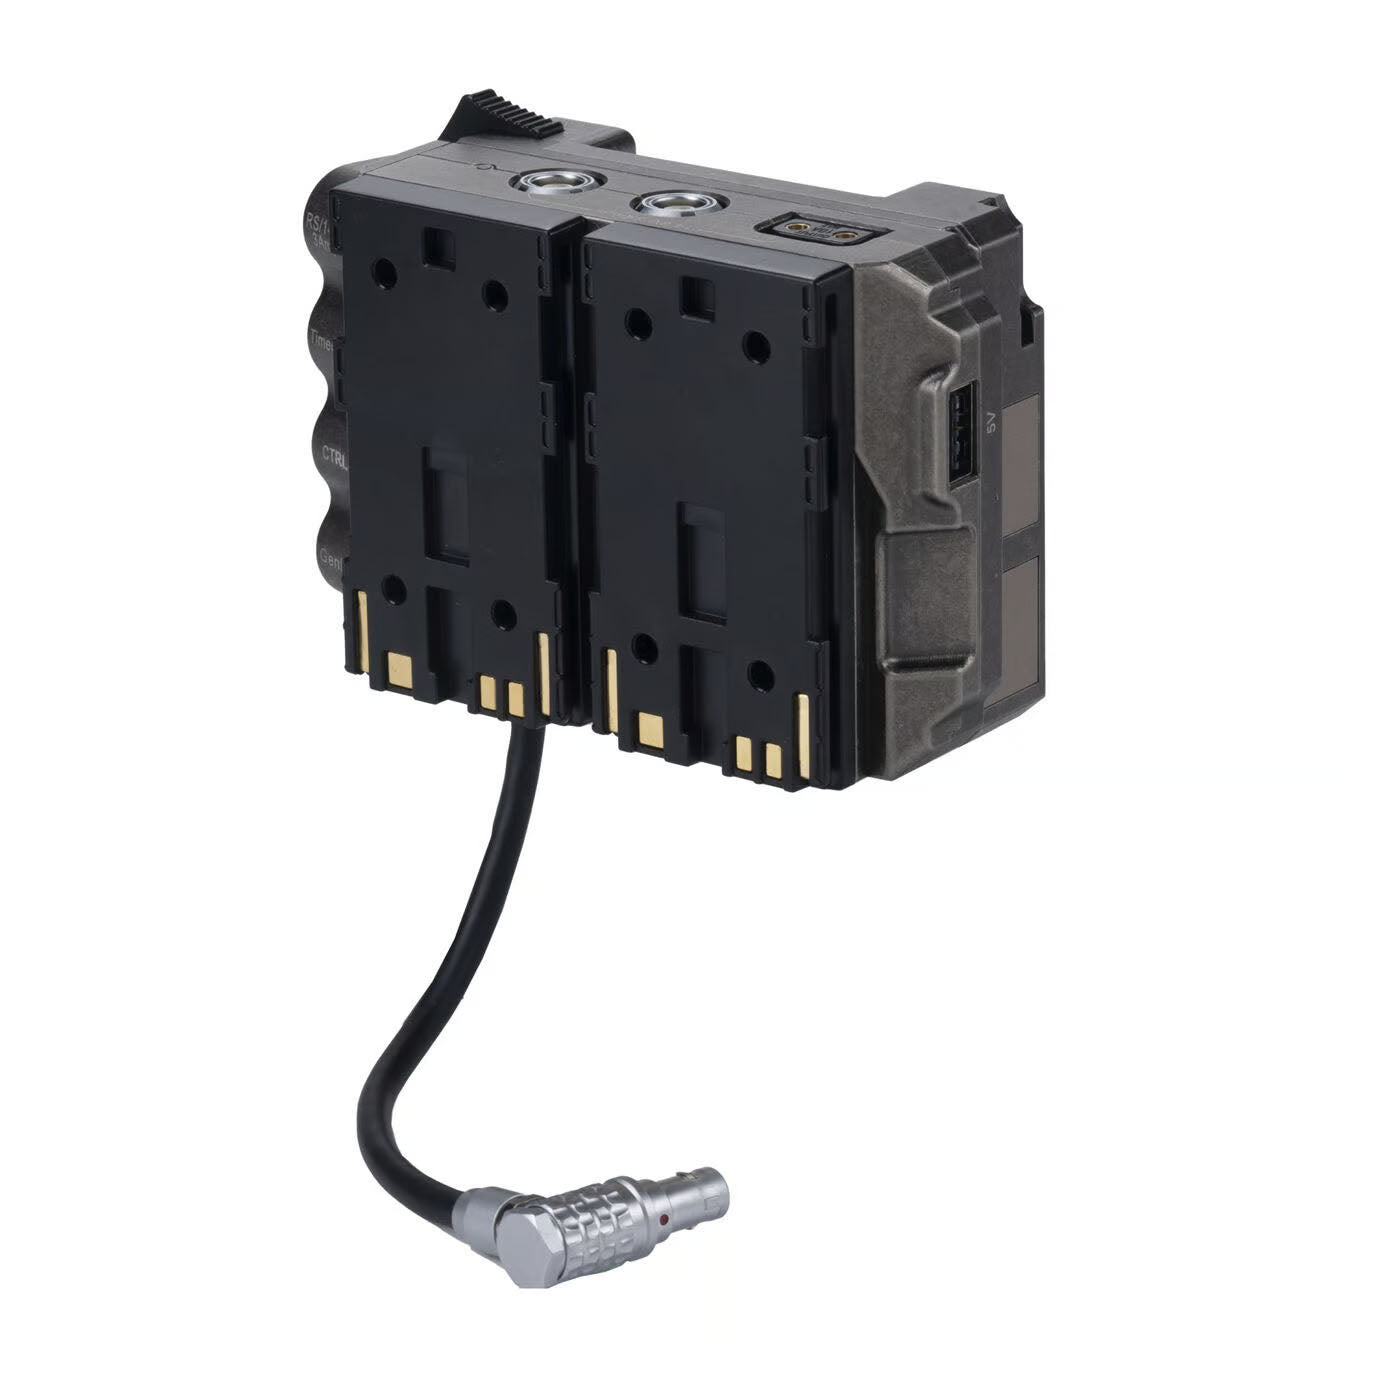 TILTA(ティルタ) Gold Mount Advanced Power Distribution Module for RED Komodo - Tactical Gray TA-T08-AMAB